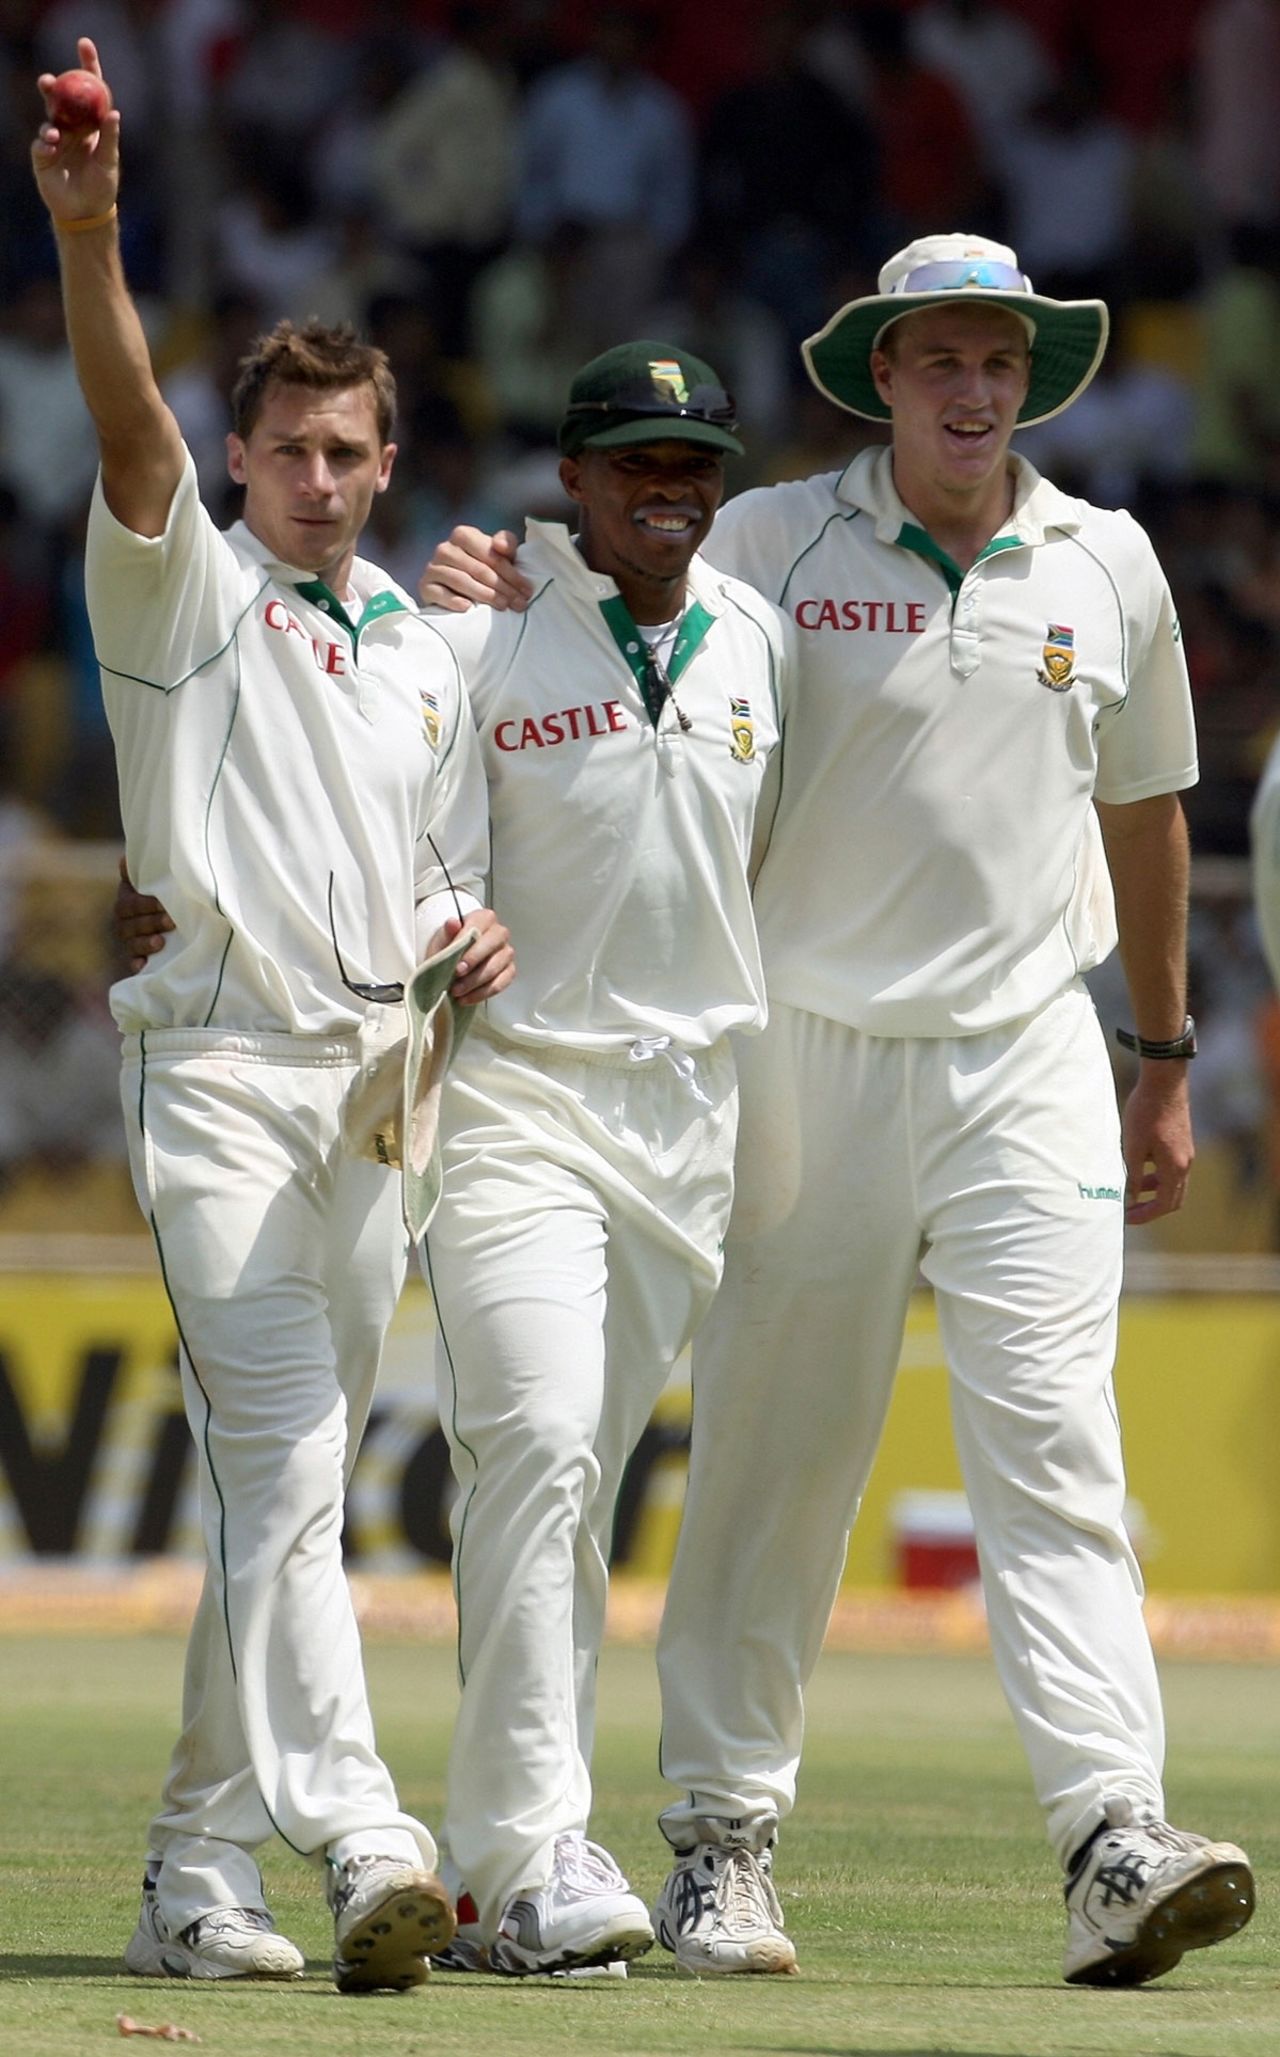 Dale Steyn, Makhaya Ntini and Morne Morkel walk off after routing India, India v South Africa, 2nd Test, Ahmedabad, 1st day, April 3, 2008